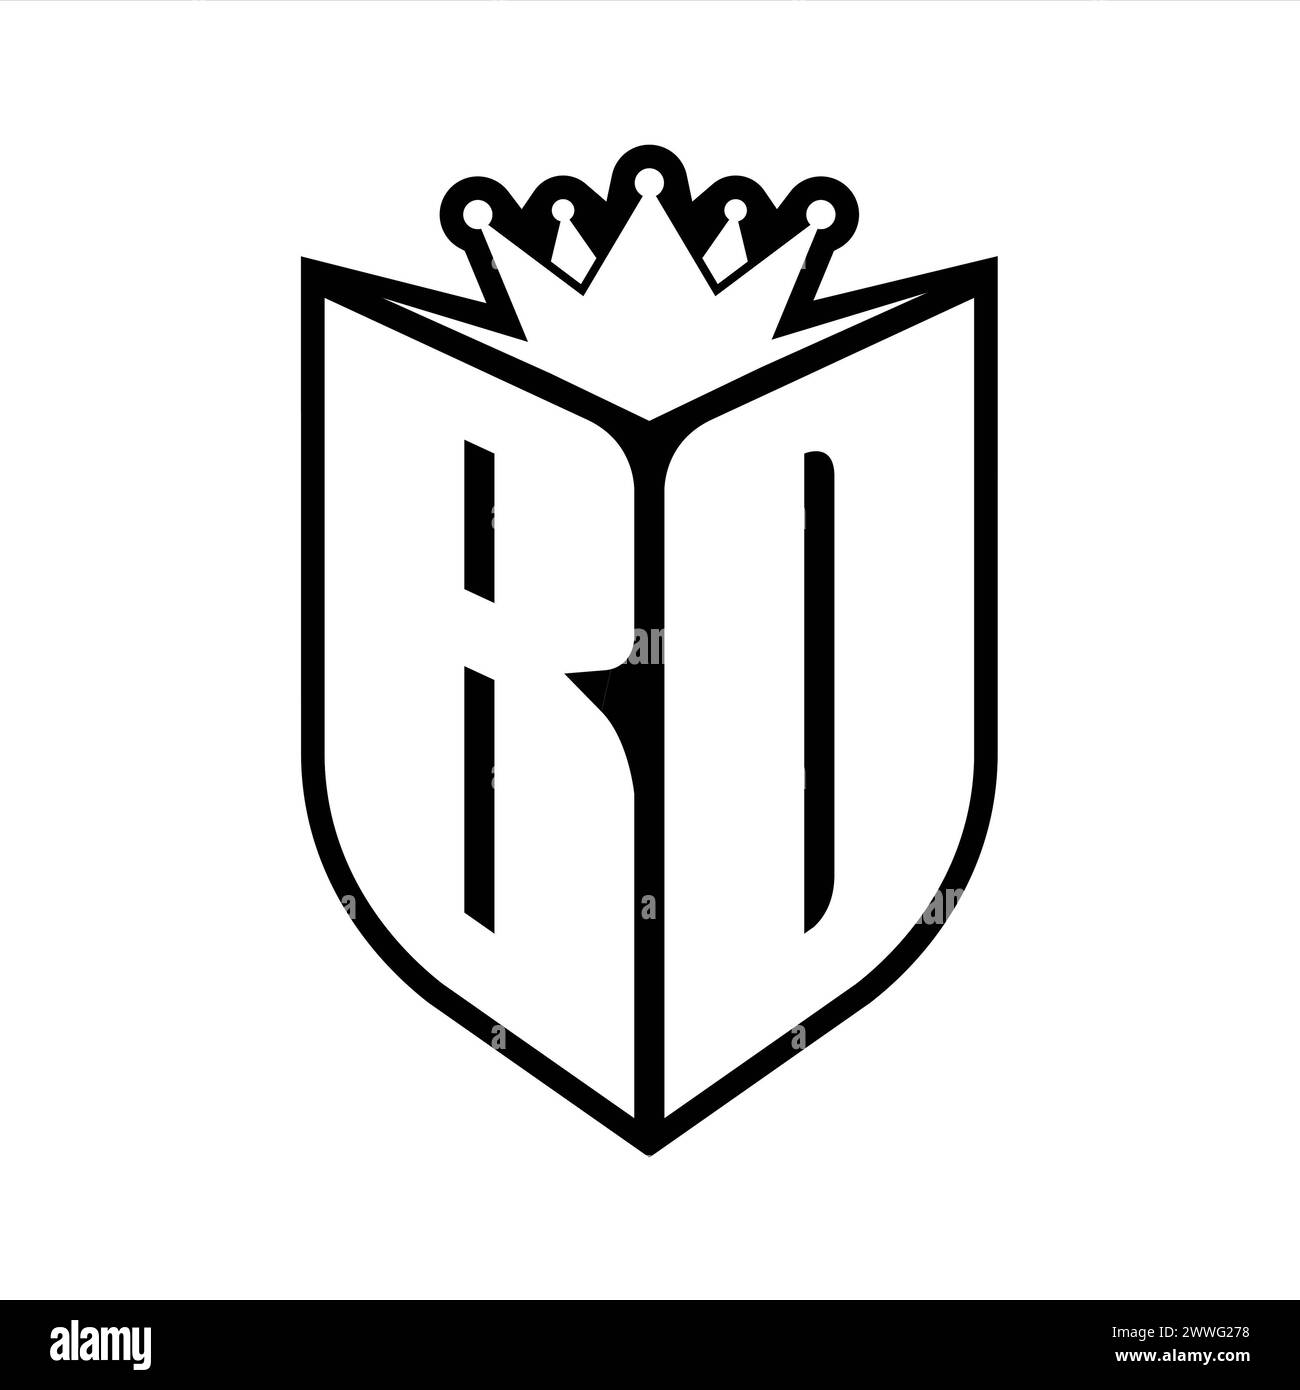 BD Letter bold monogram with shield shape and sharp crown inside shield black and white color design template Stock Photo